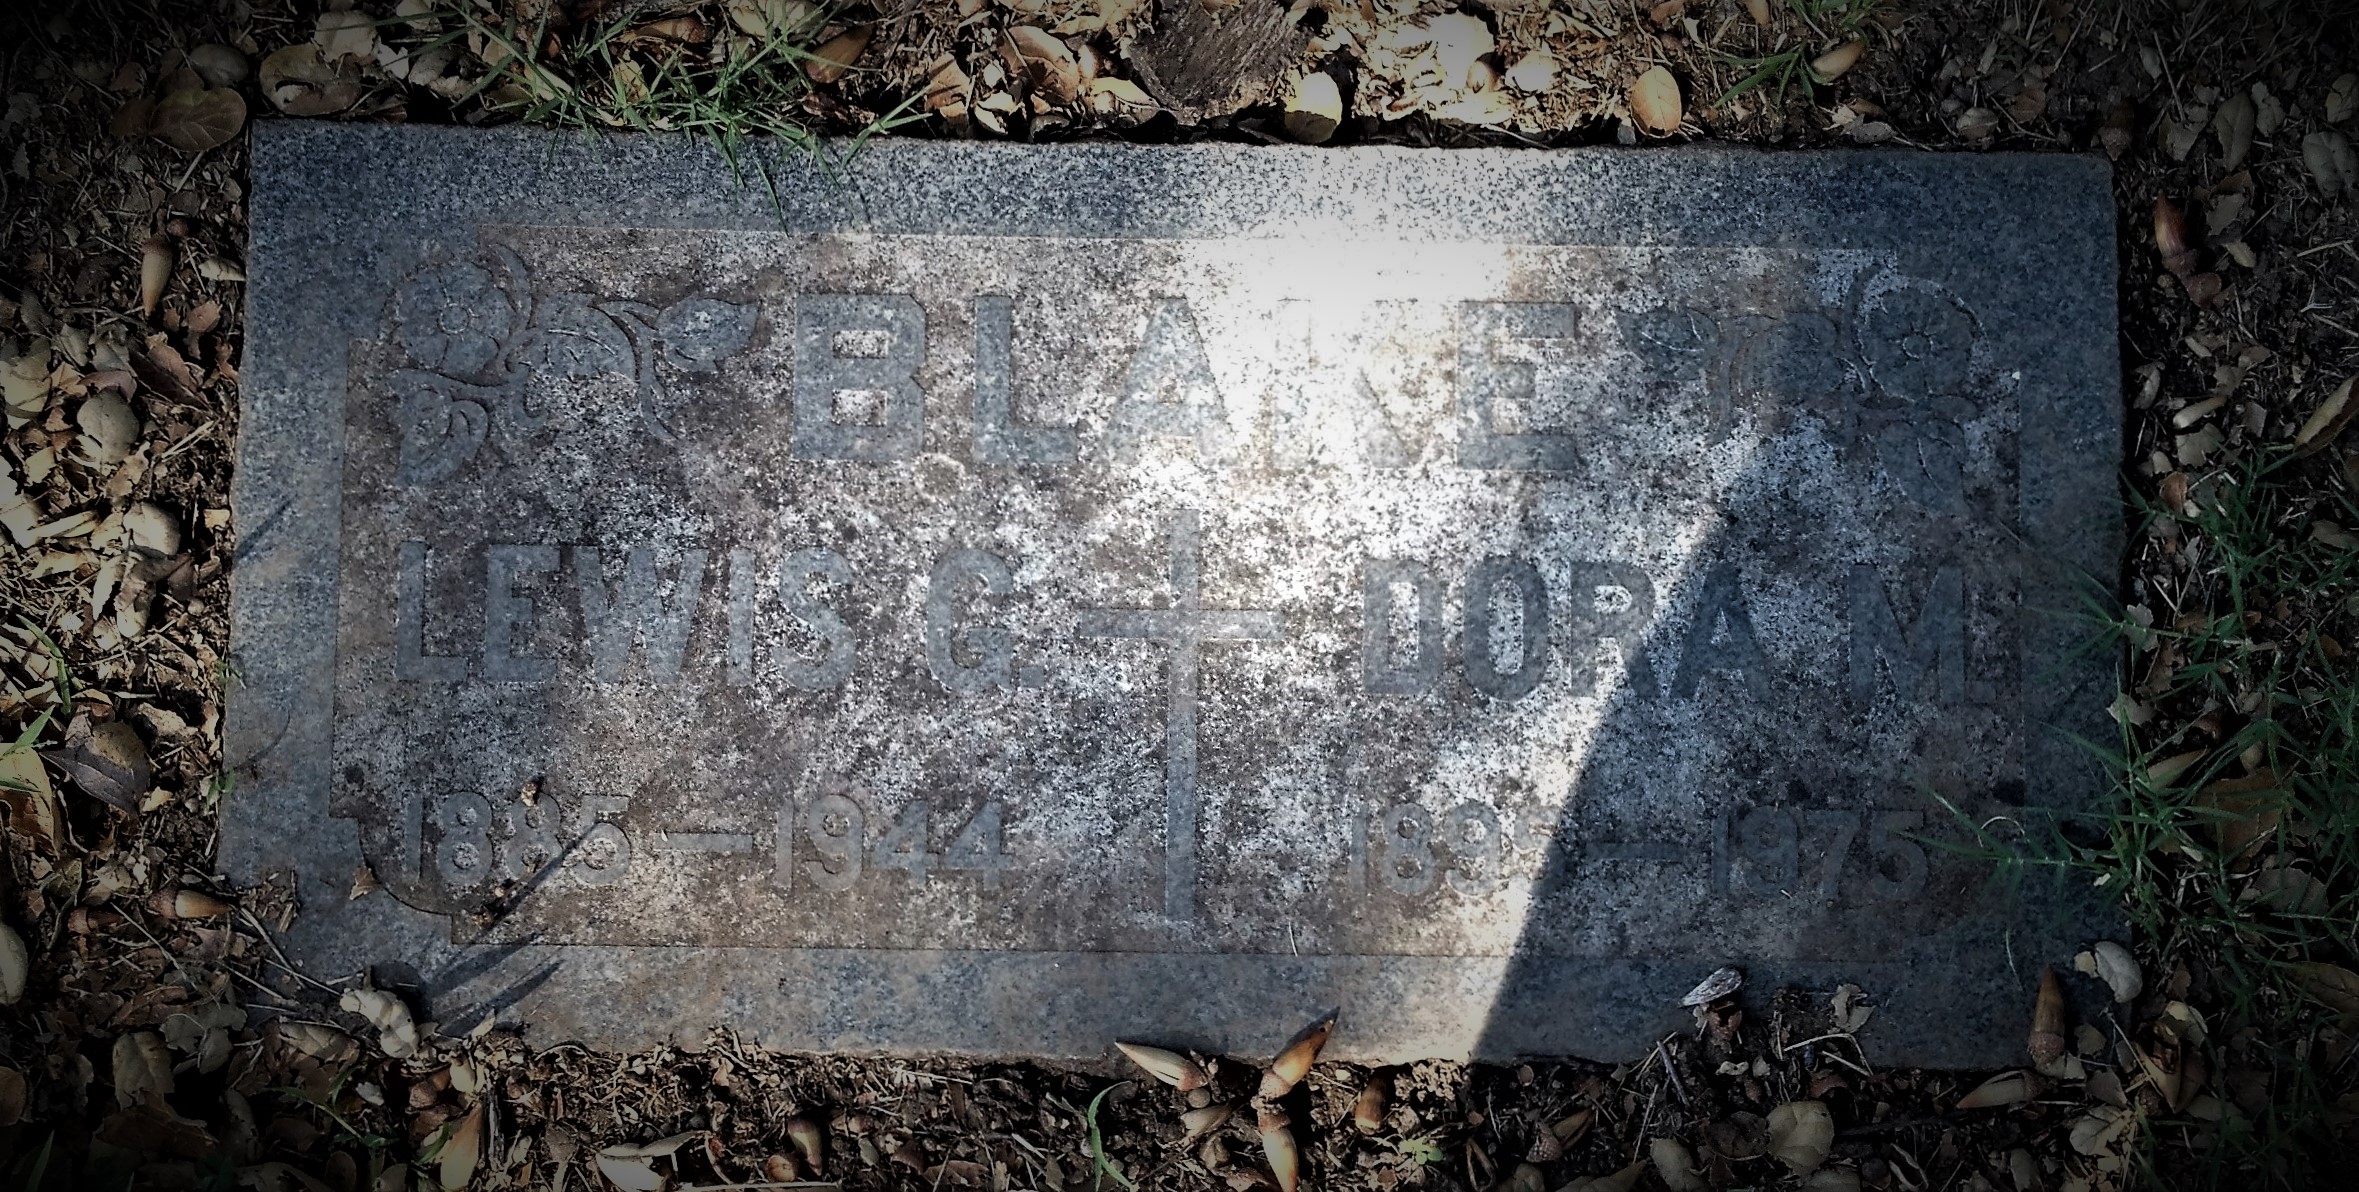   https://www.findagrave.com/   Bob’s Aunt Dora married Lewis Garner Blake (1885-1944) April 2, 1921. She was born Aug. 9, 1895, and died Jan. 9, 1975. They had no children. She was the sister of James William Francis, Bob’s father. She is buried at 